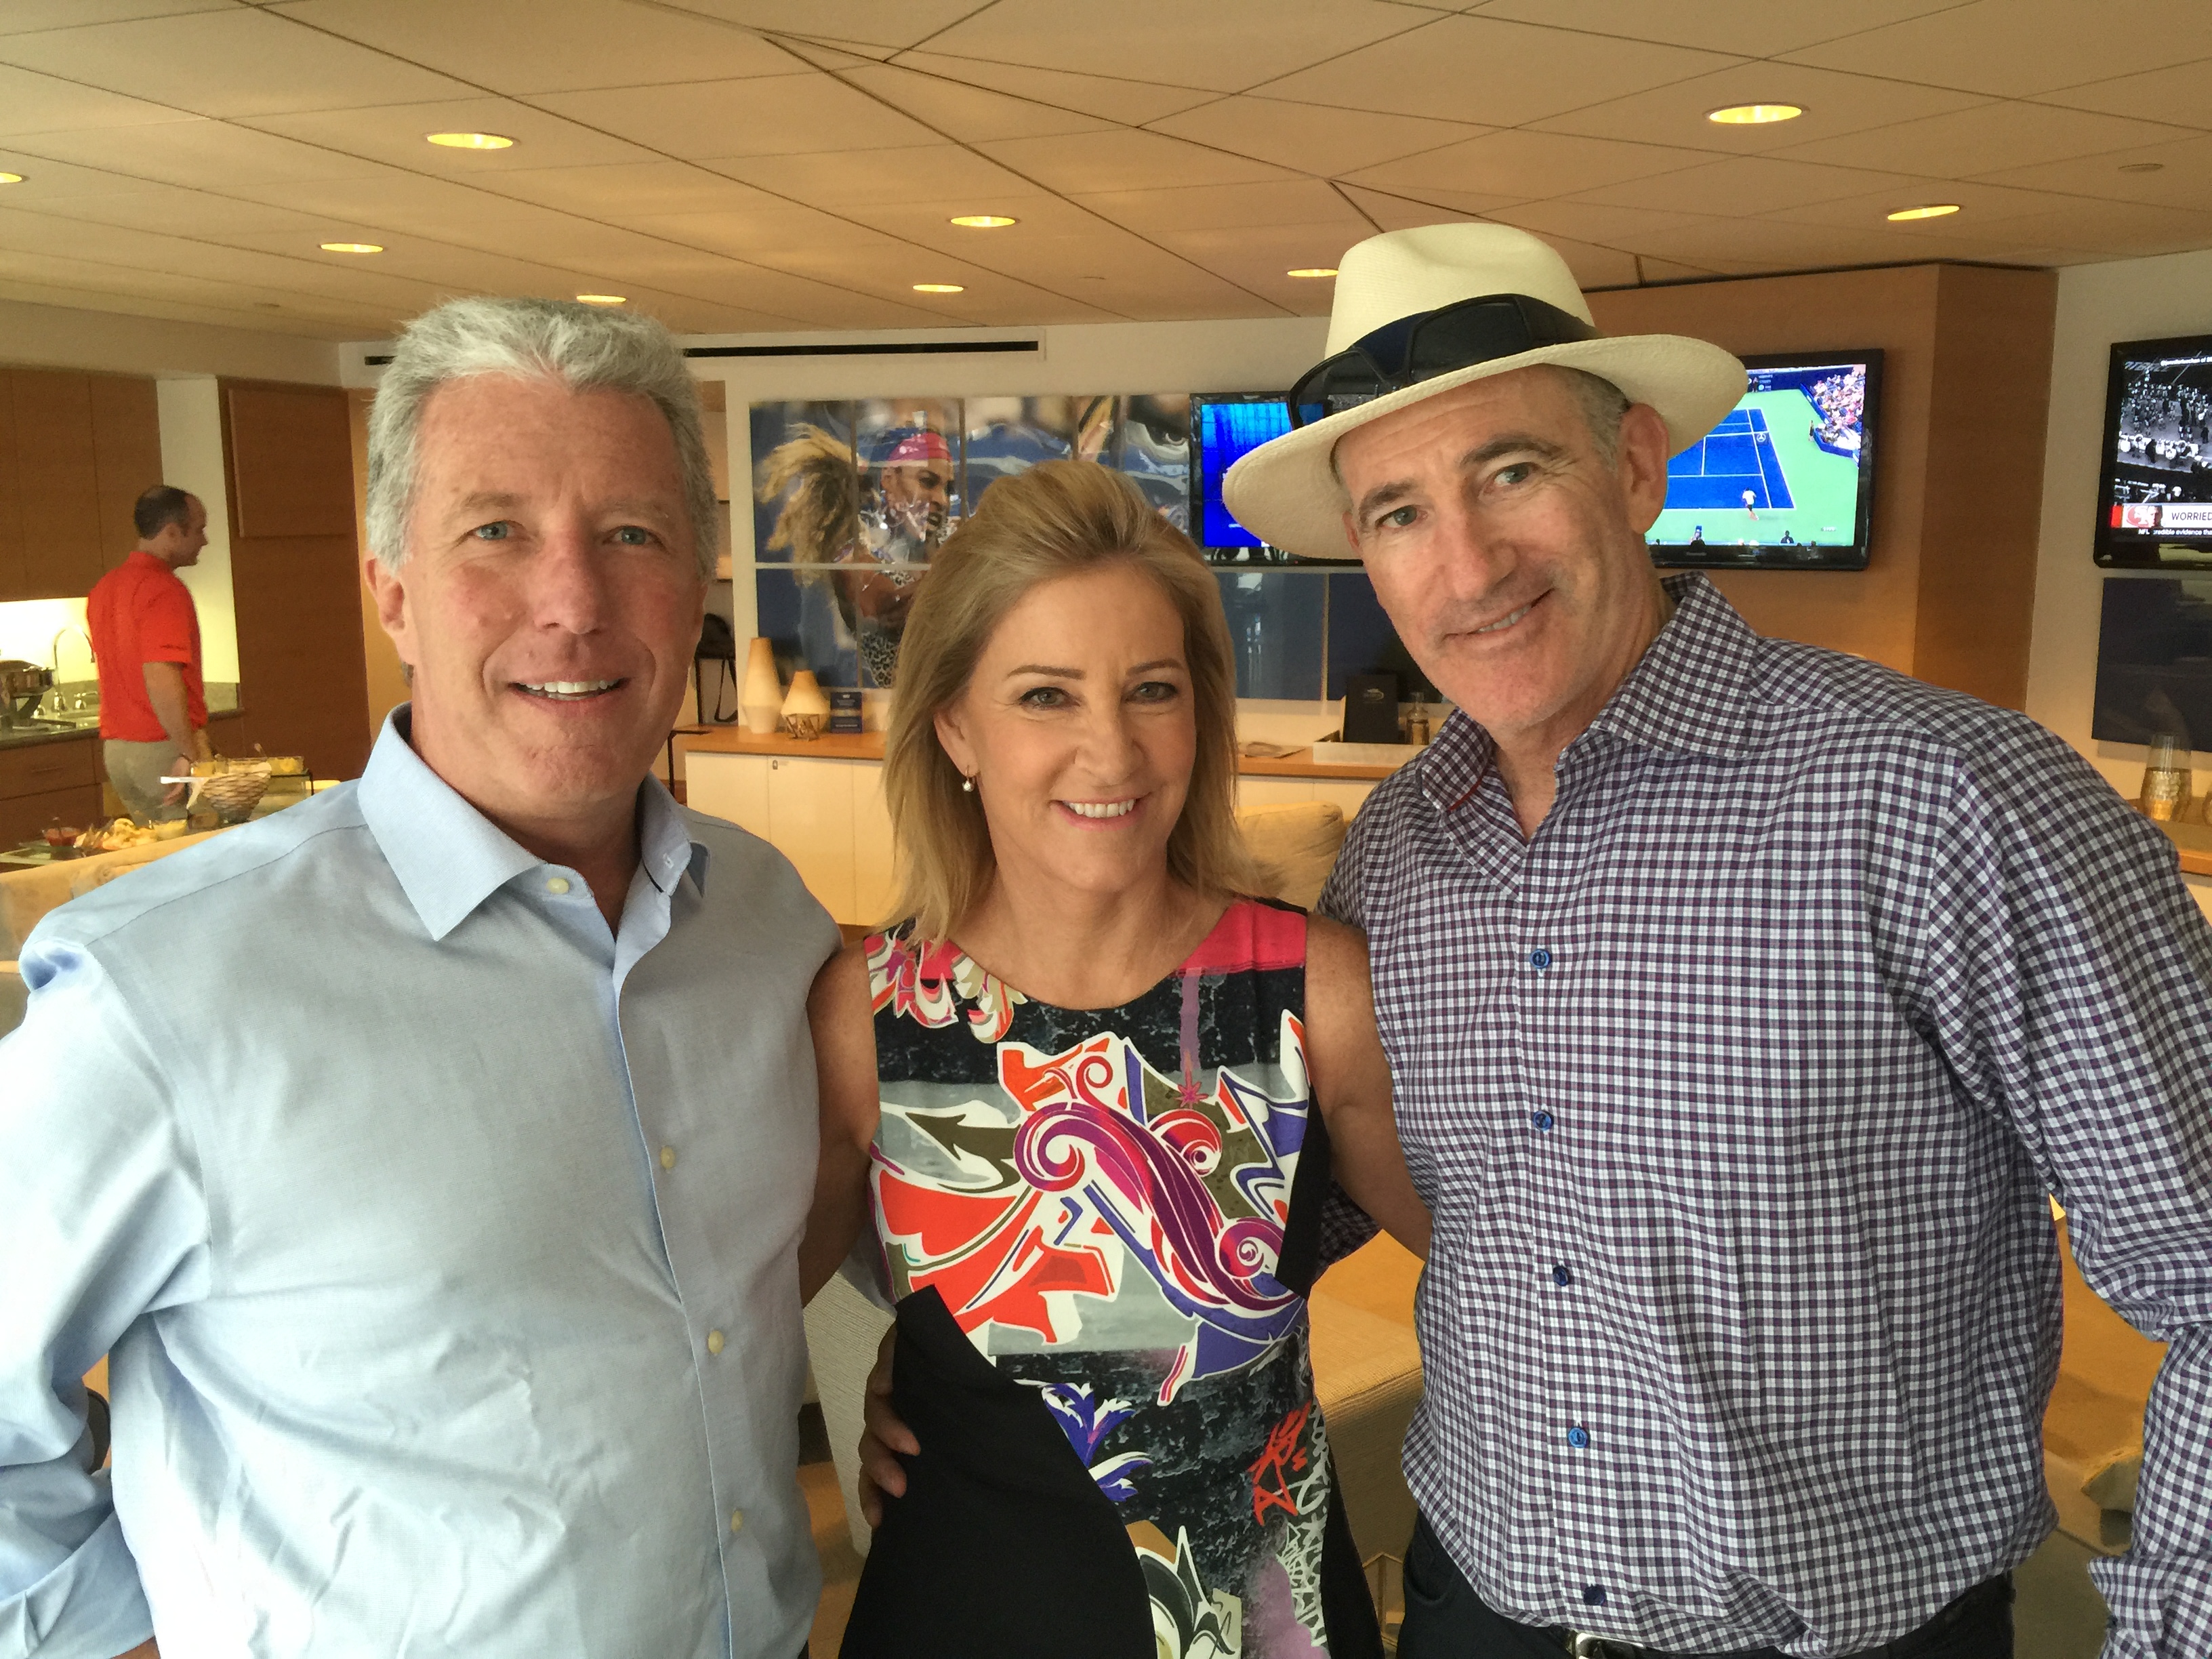 ESPN VP of Production Jamie Reynolds (left) with US Open announcers Chris Evert and Cliff Drysdale